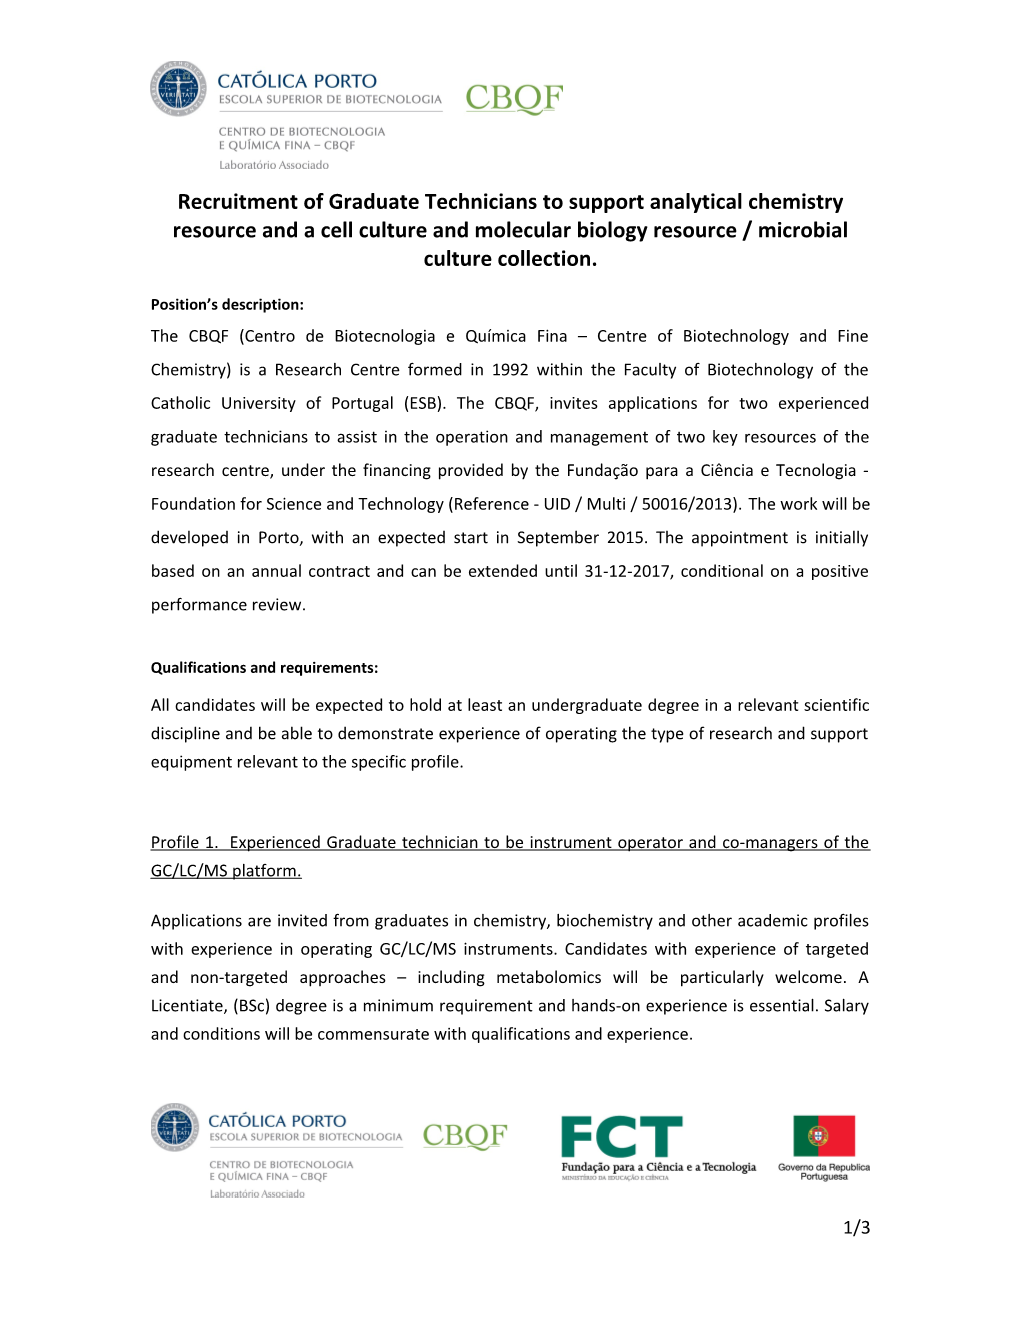 Recruitment of Graduate Technicians to Support Analytical Chemistry Resource and a Cell